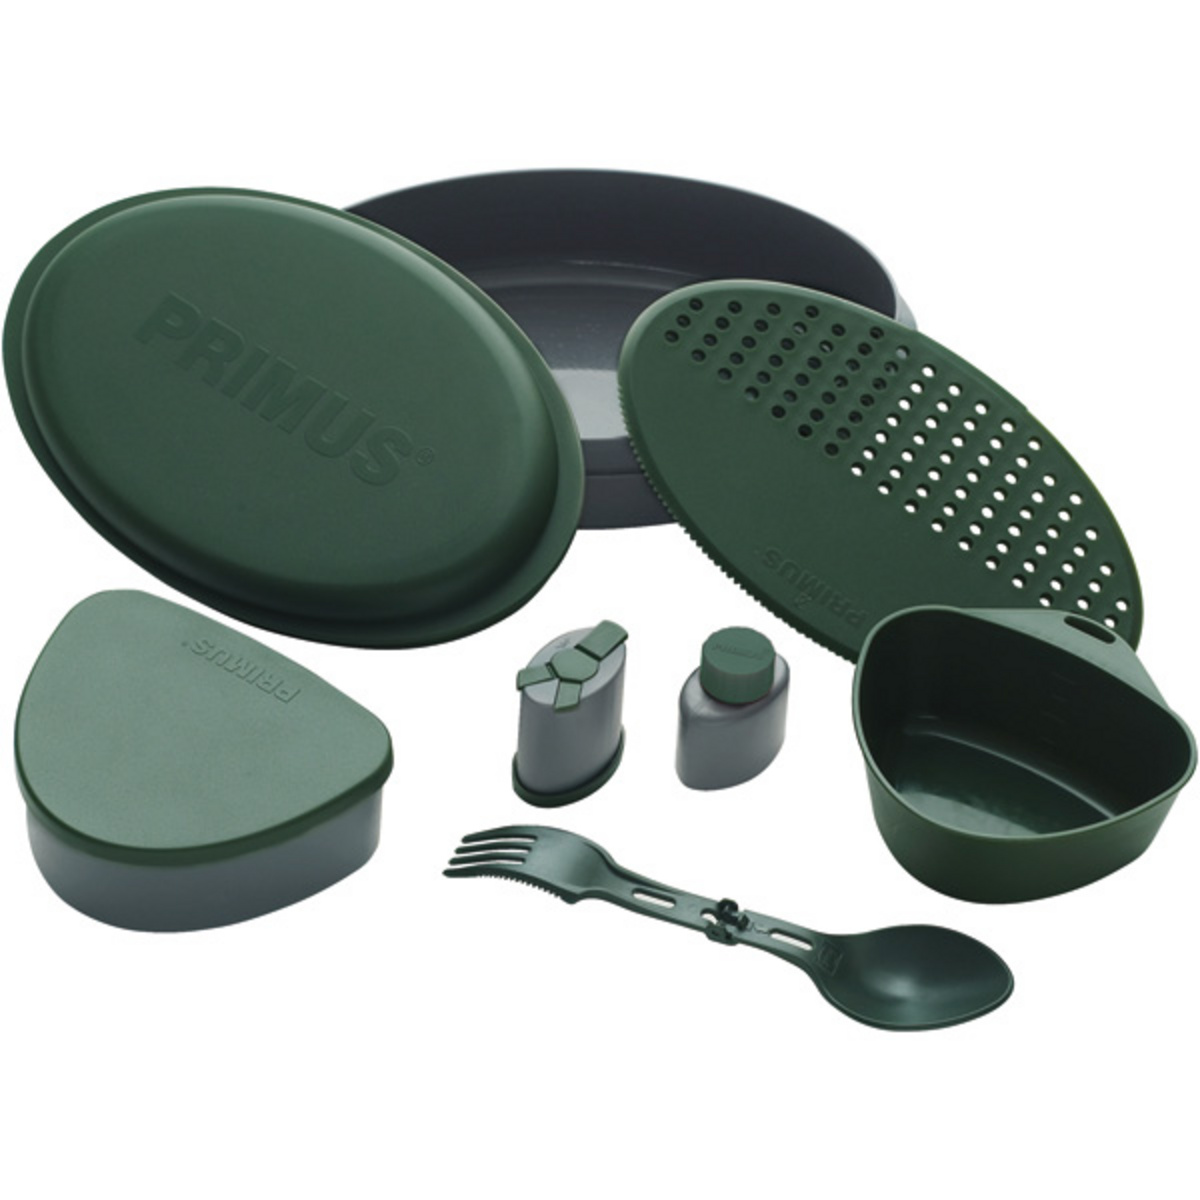 Image of Primus Meal Set